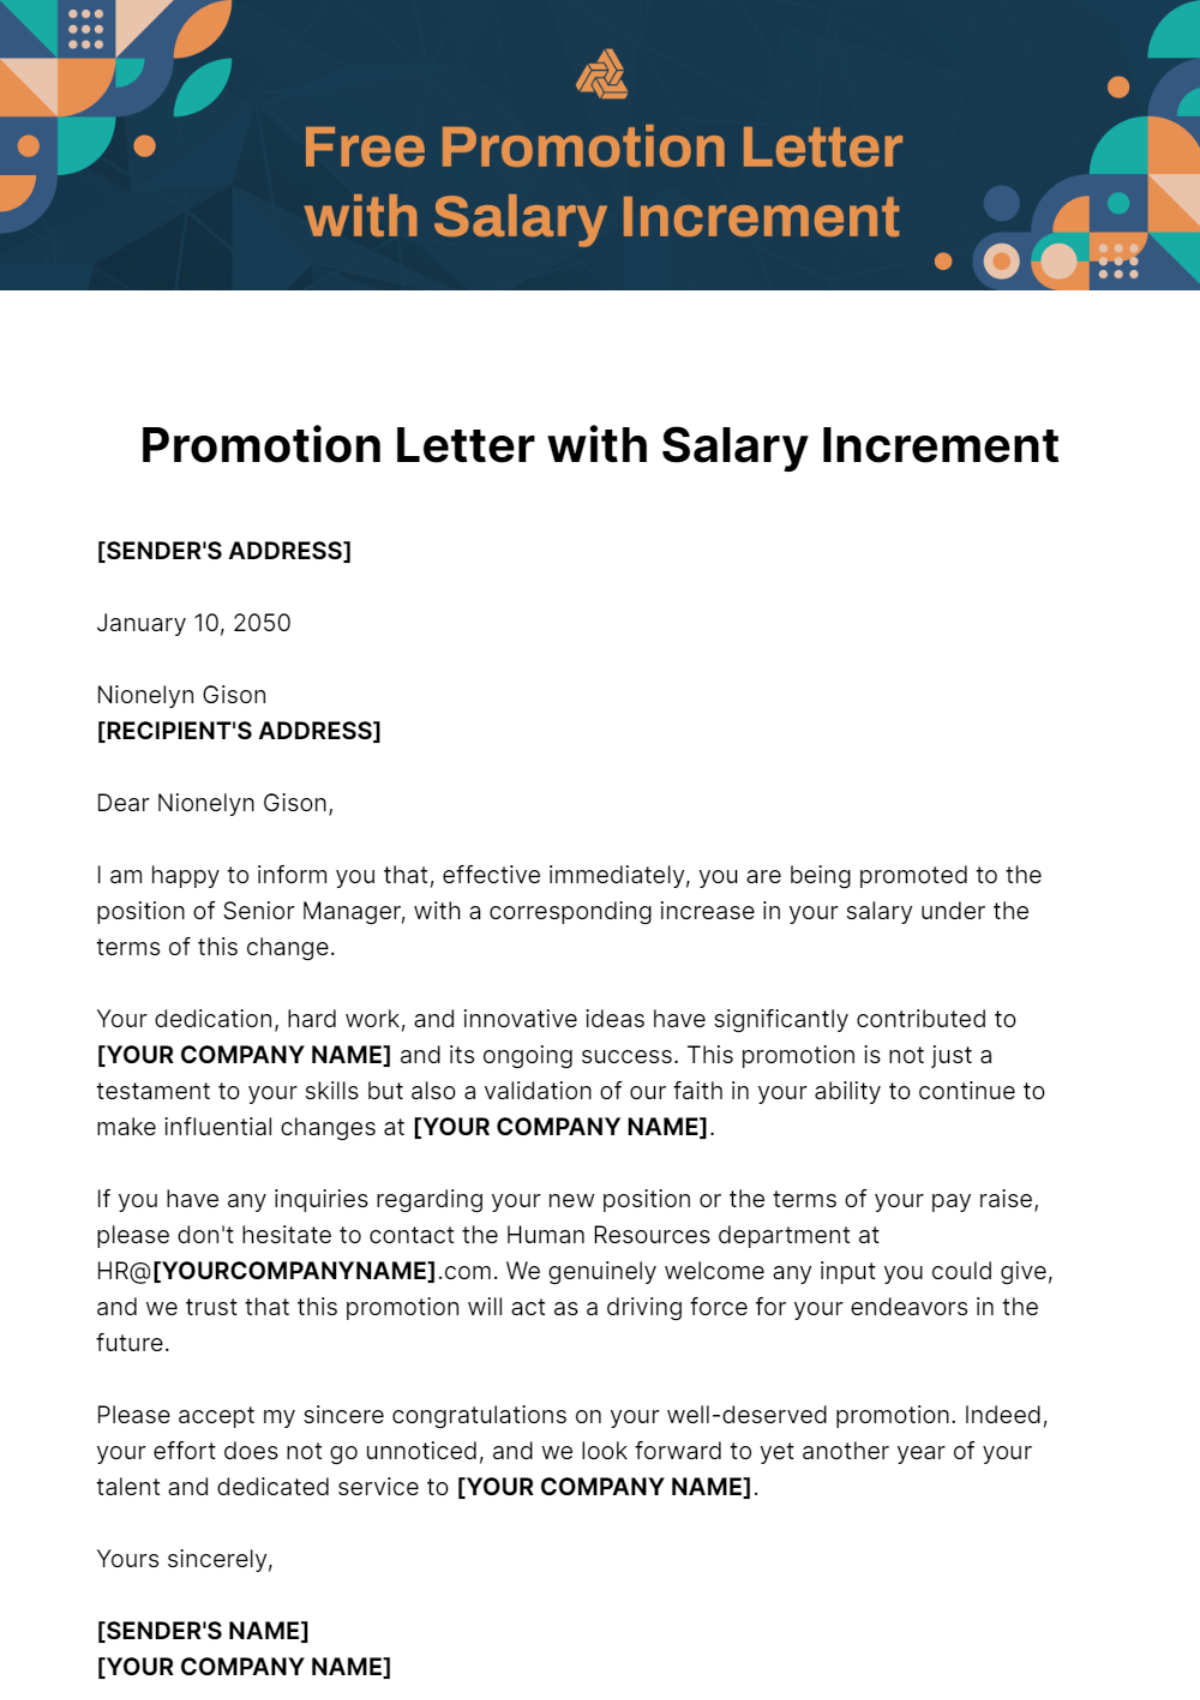 Promotion Letter with Salary Increment Template